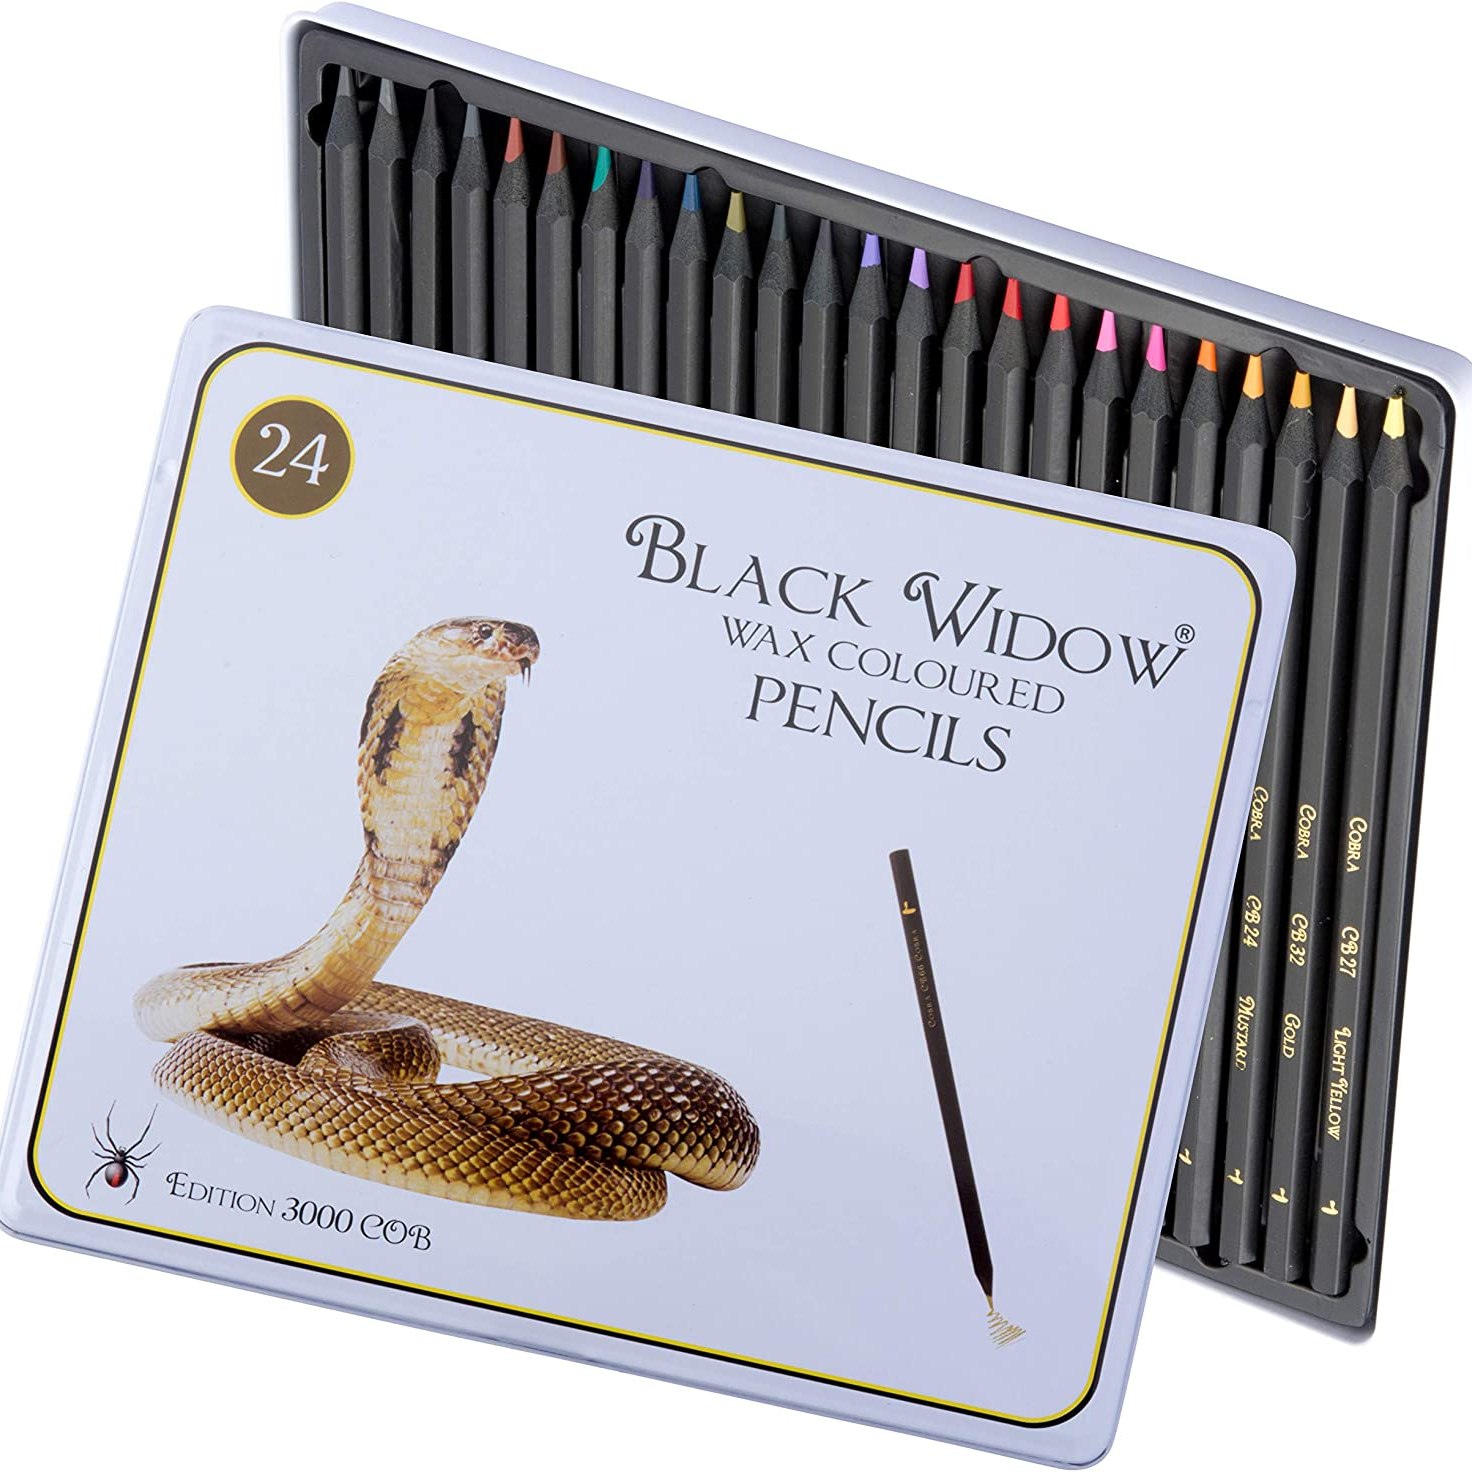 Black Widow Colored Pencil Review - Best Colored Pencils - Reviews and  Picks